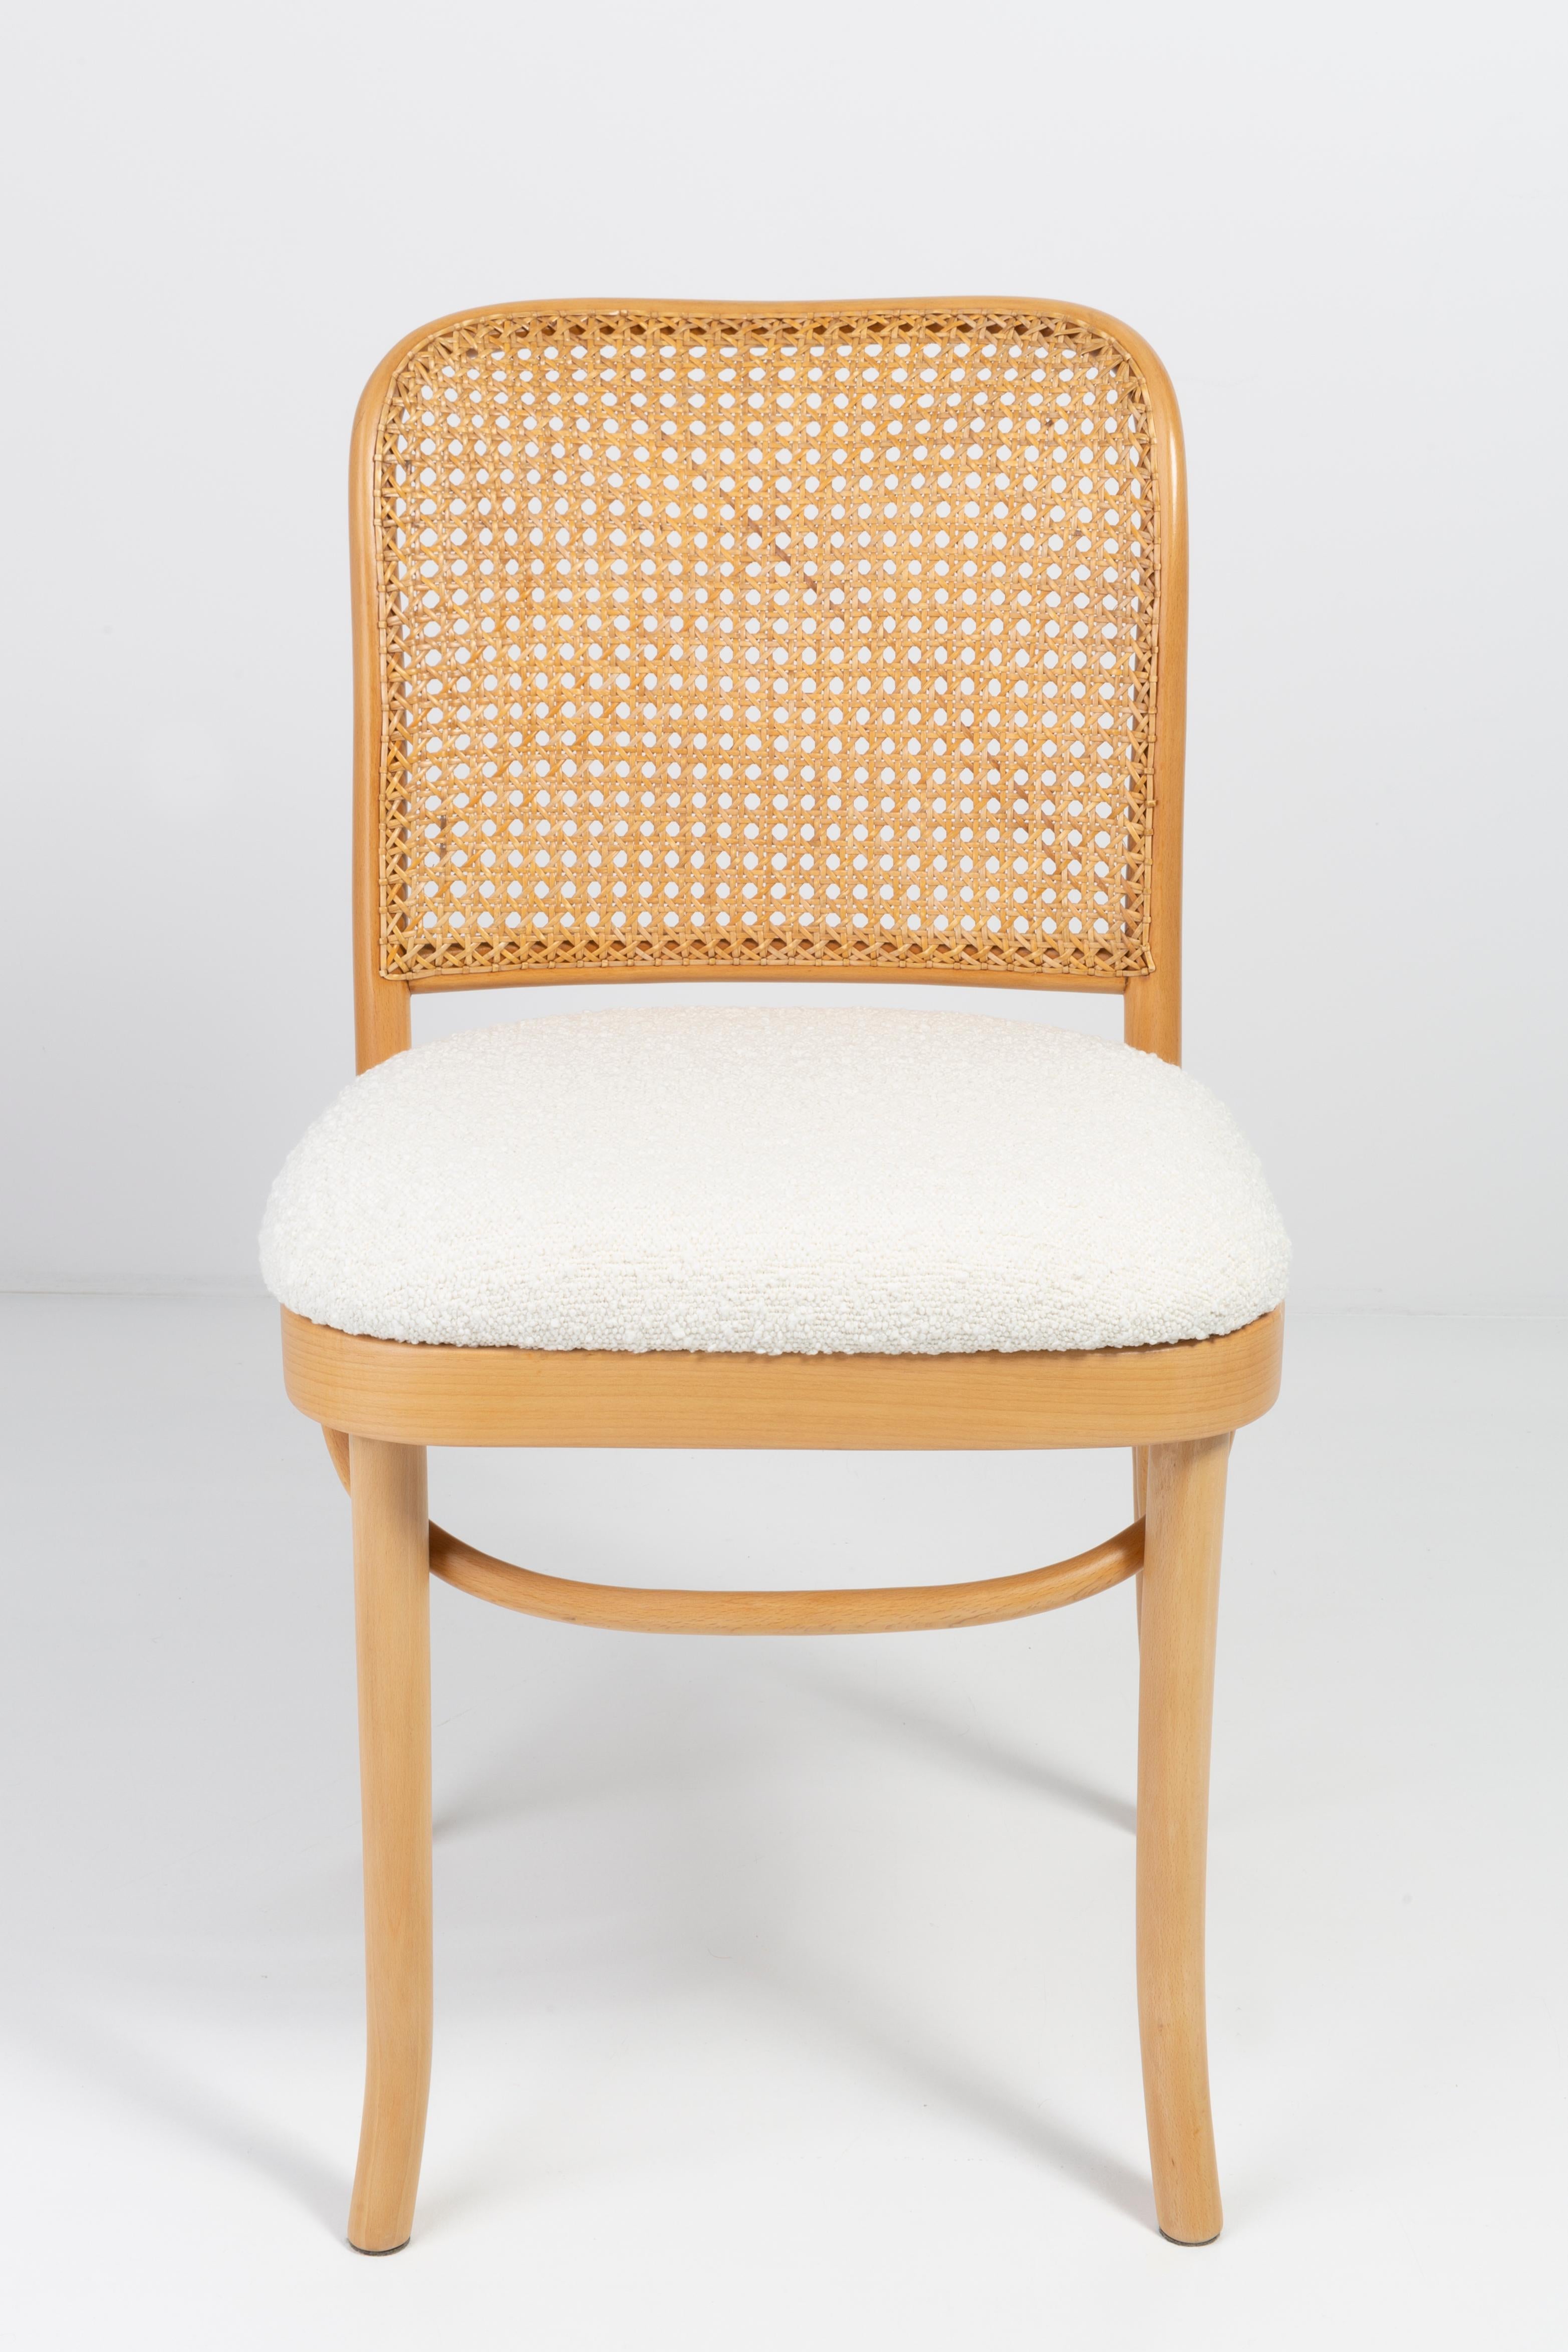 Set of Four White Boucle Thonet Wood Rattan Chairs, 1960s For Sale 9